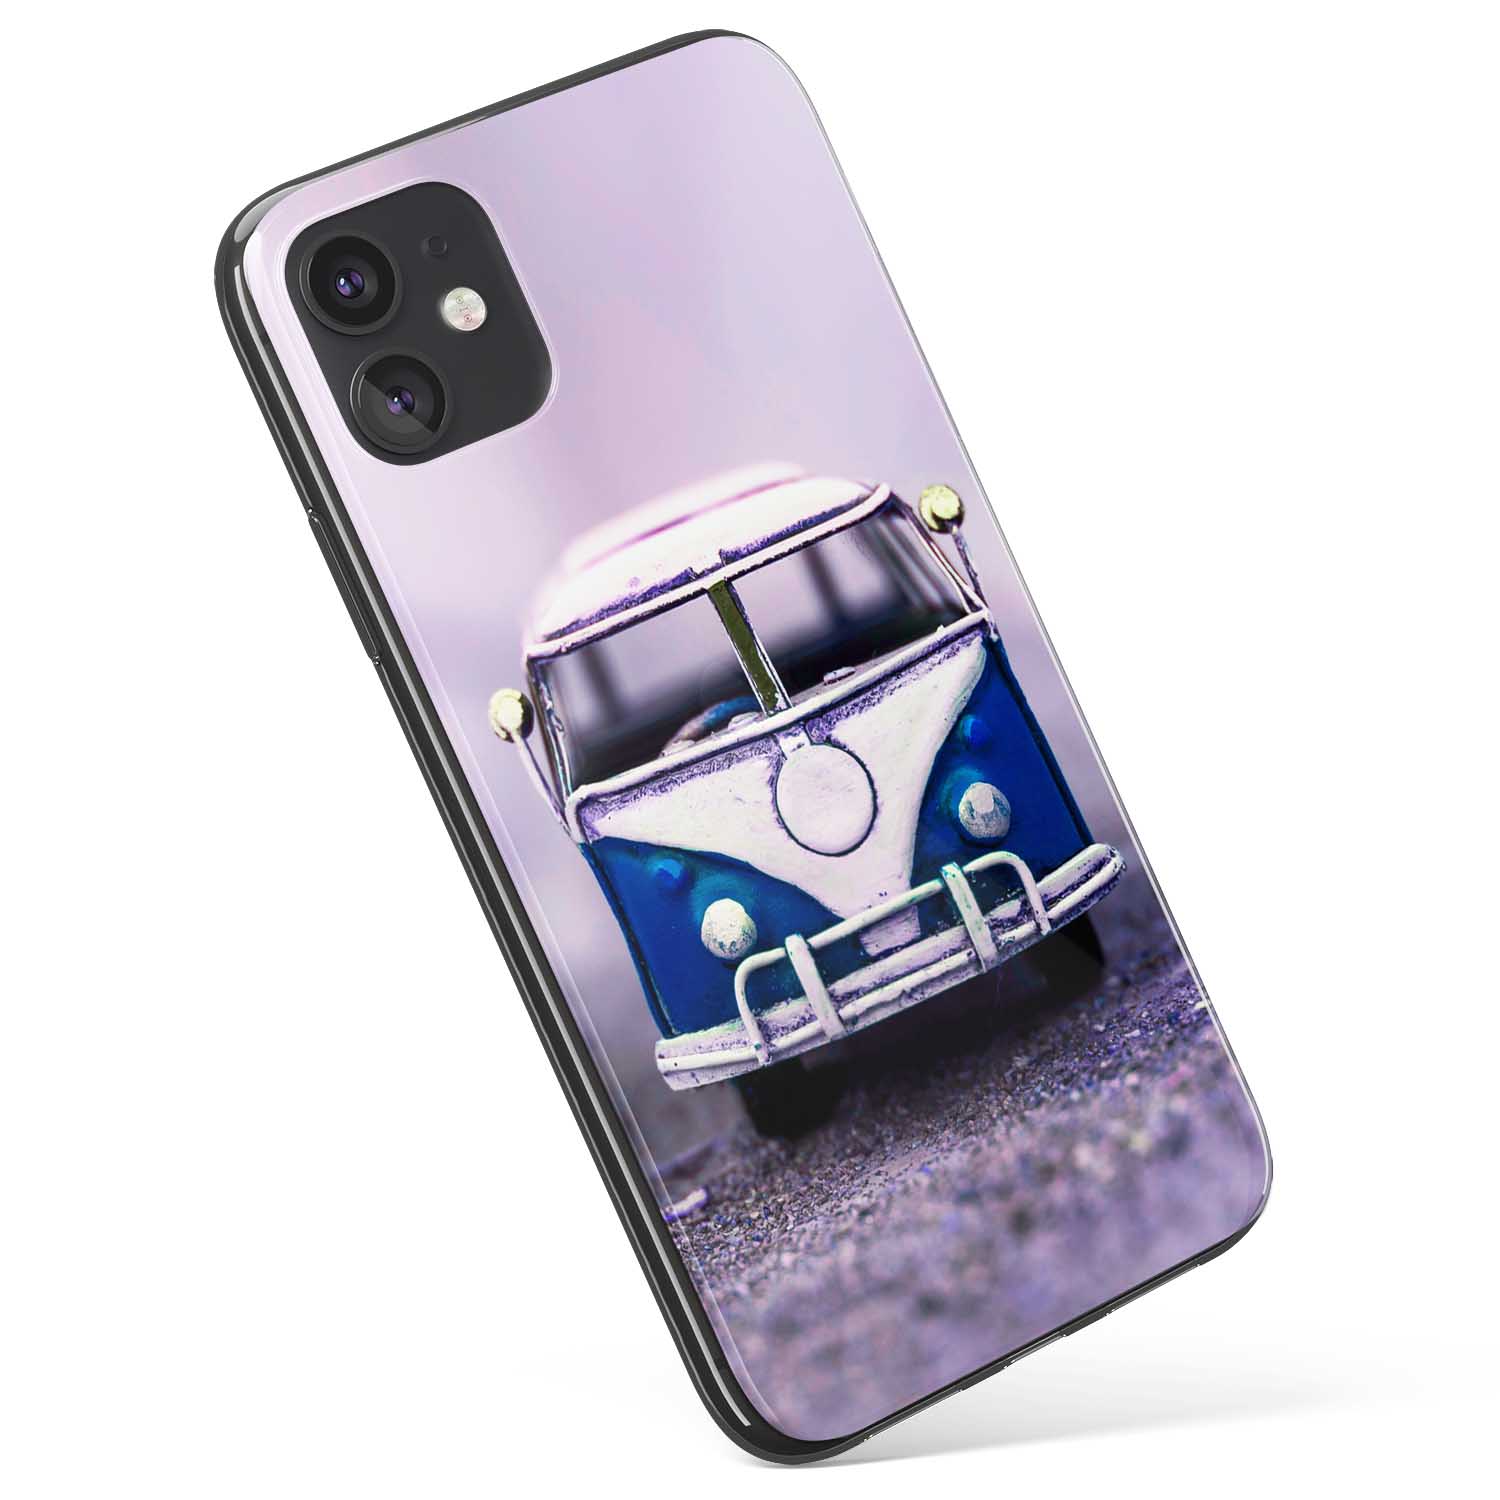 Azzumo Blue Camper Van Soft Flexible Ultra Thin Case Cover For the Apple iPod Touch 5th Gen 